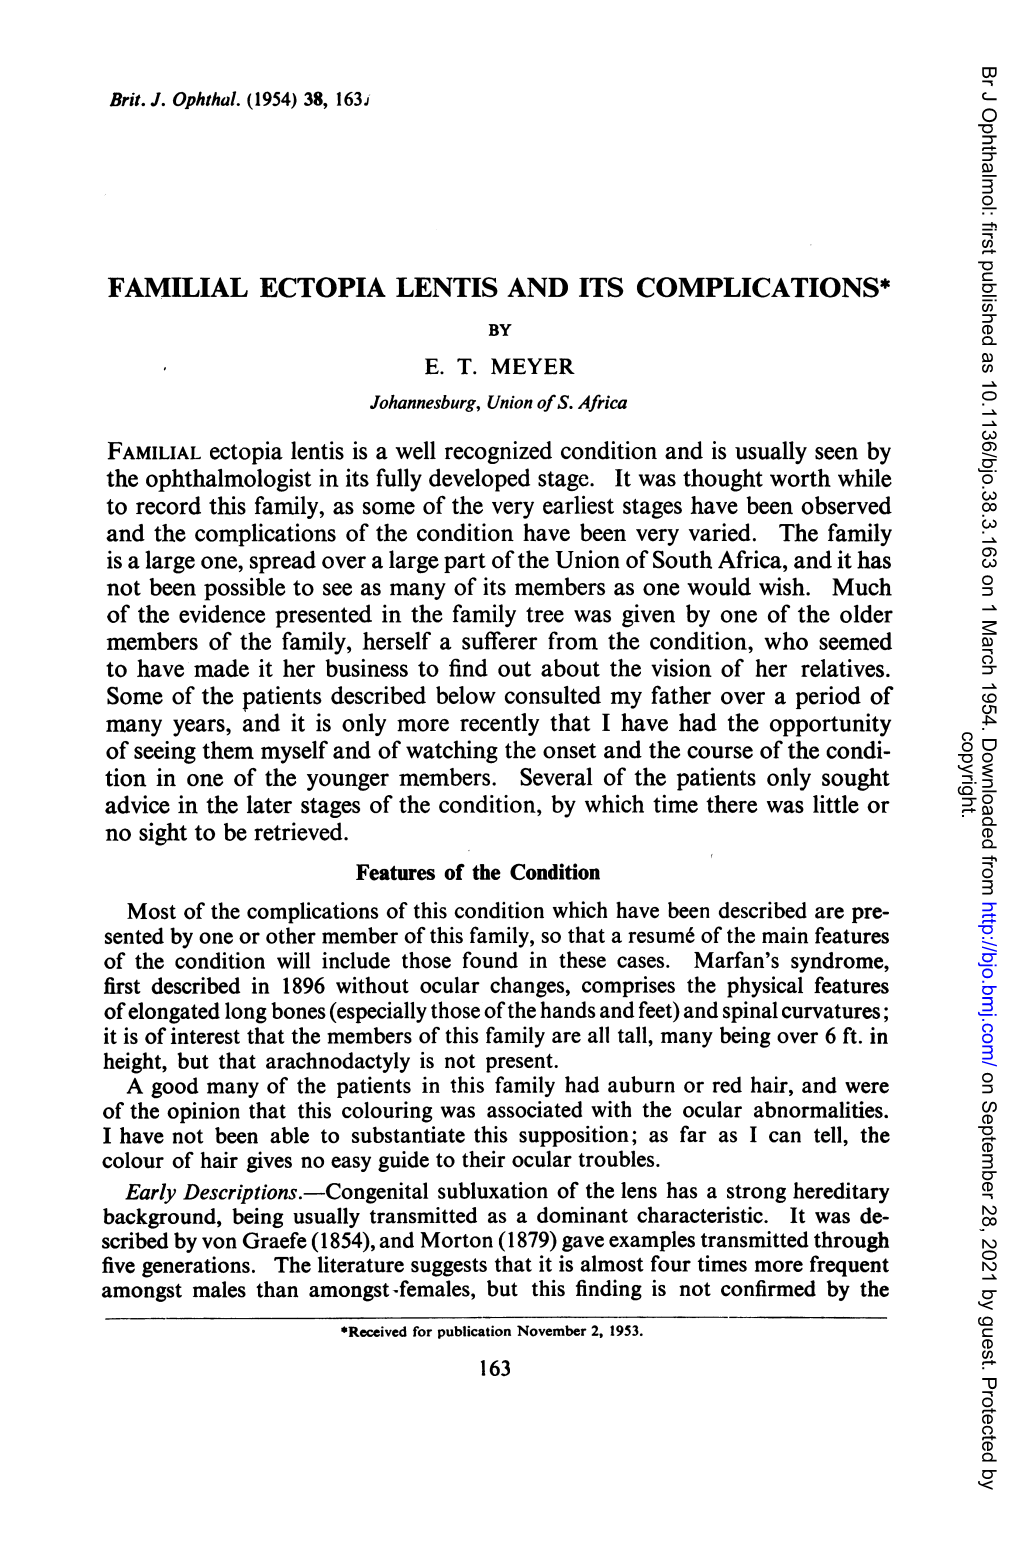 FAMILIAL ECTOPIA LENTIS and ITS COMPLICATIONS* Tion in One Of